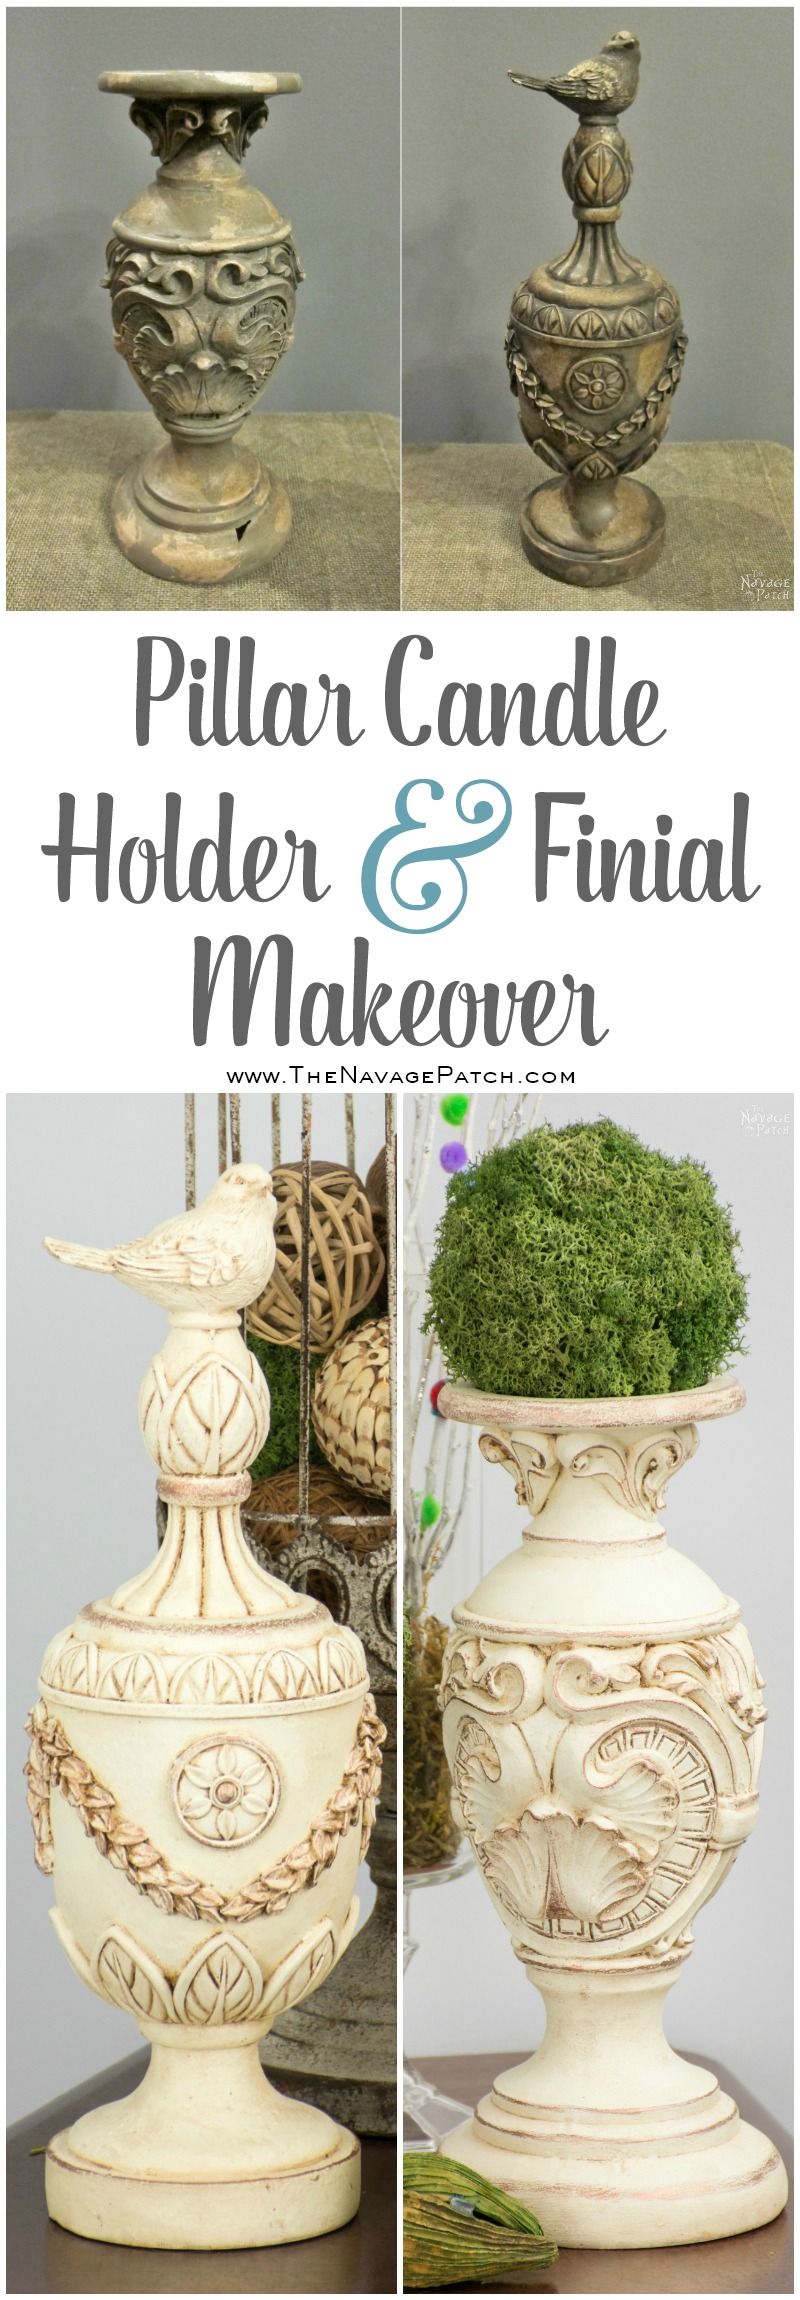 Pillar Candle Holder and Finial Update | How to fix broken resin decor | Updating home decor with homemade chalk paint | Homemade chalk paint recipe | How to use metallic wax | Painted and antiqued home decor | How to highlight relief and ornate | TheNavagePatch.com